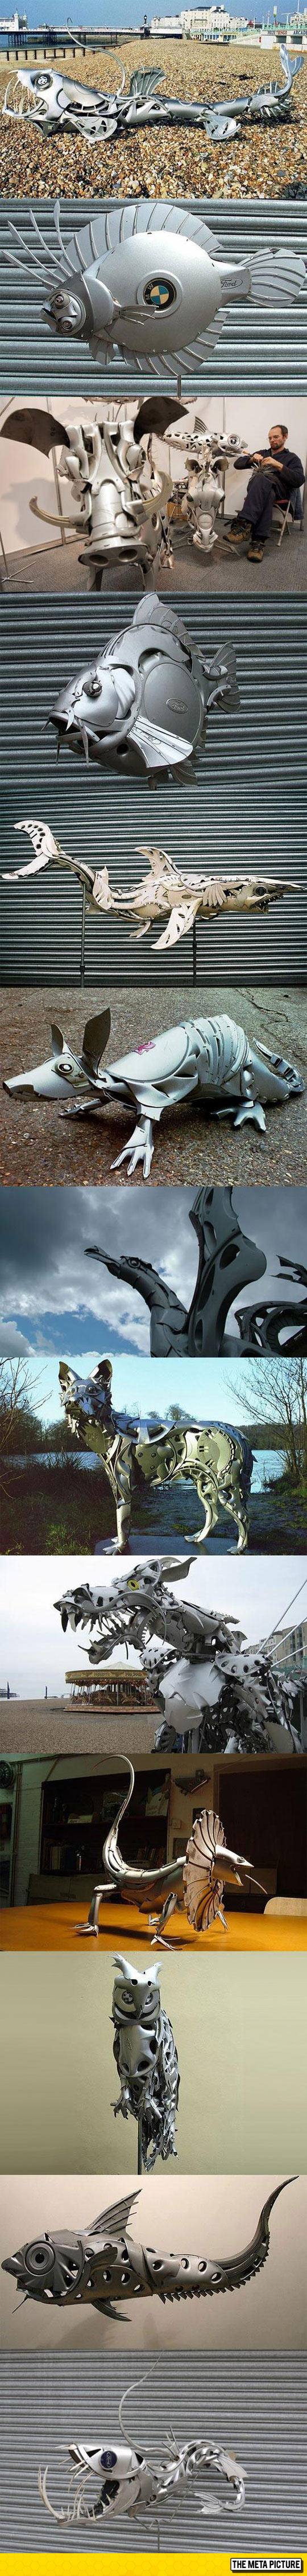 Awesome Hubcap Sculptures